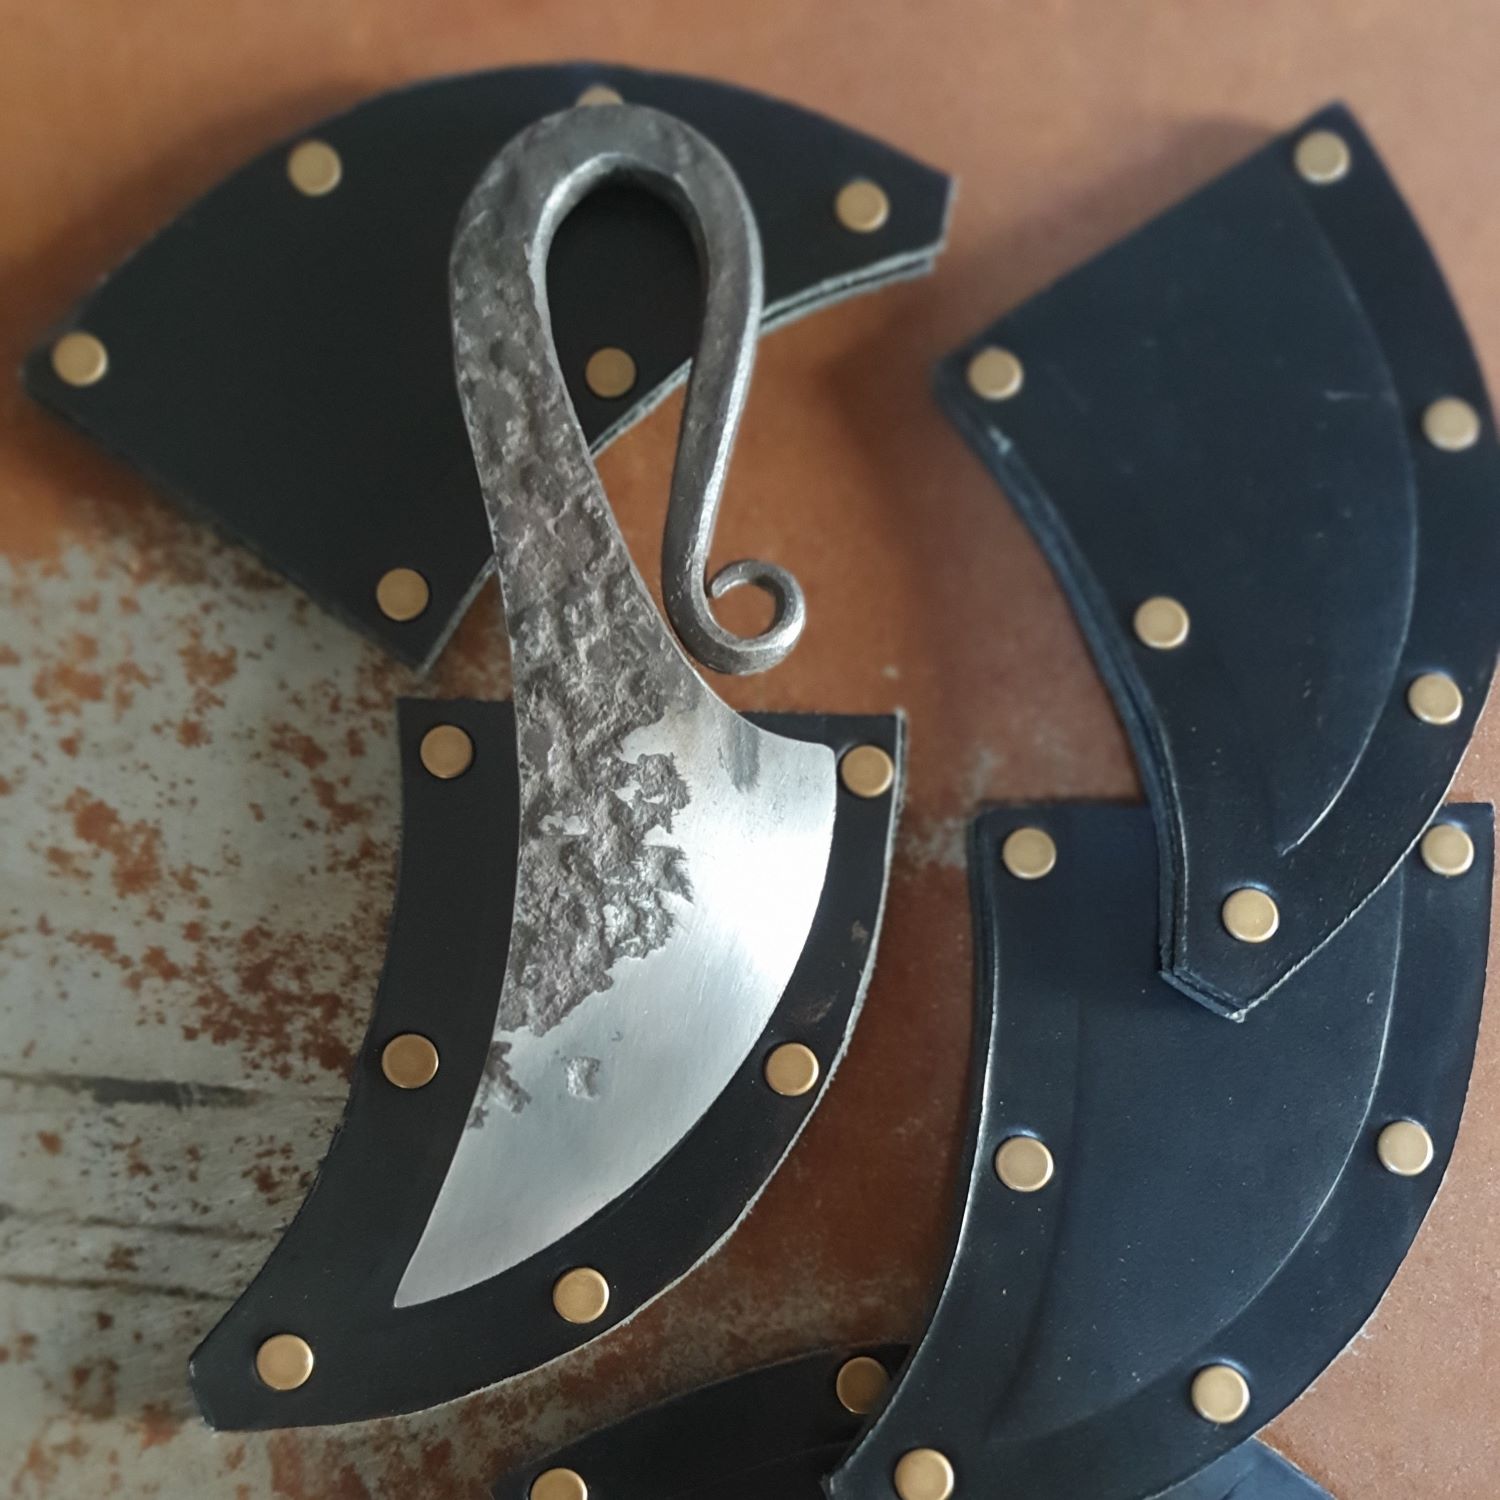 The small curved knife with complimentary leather sheath